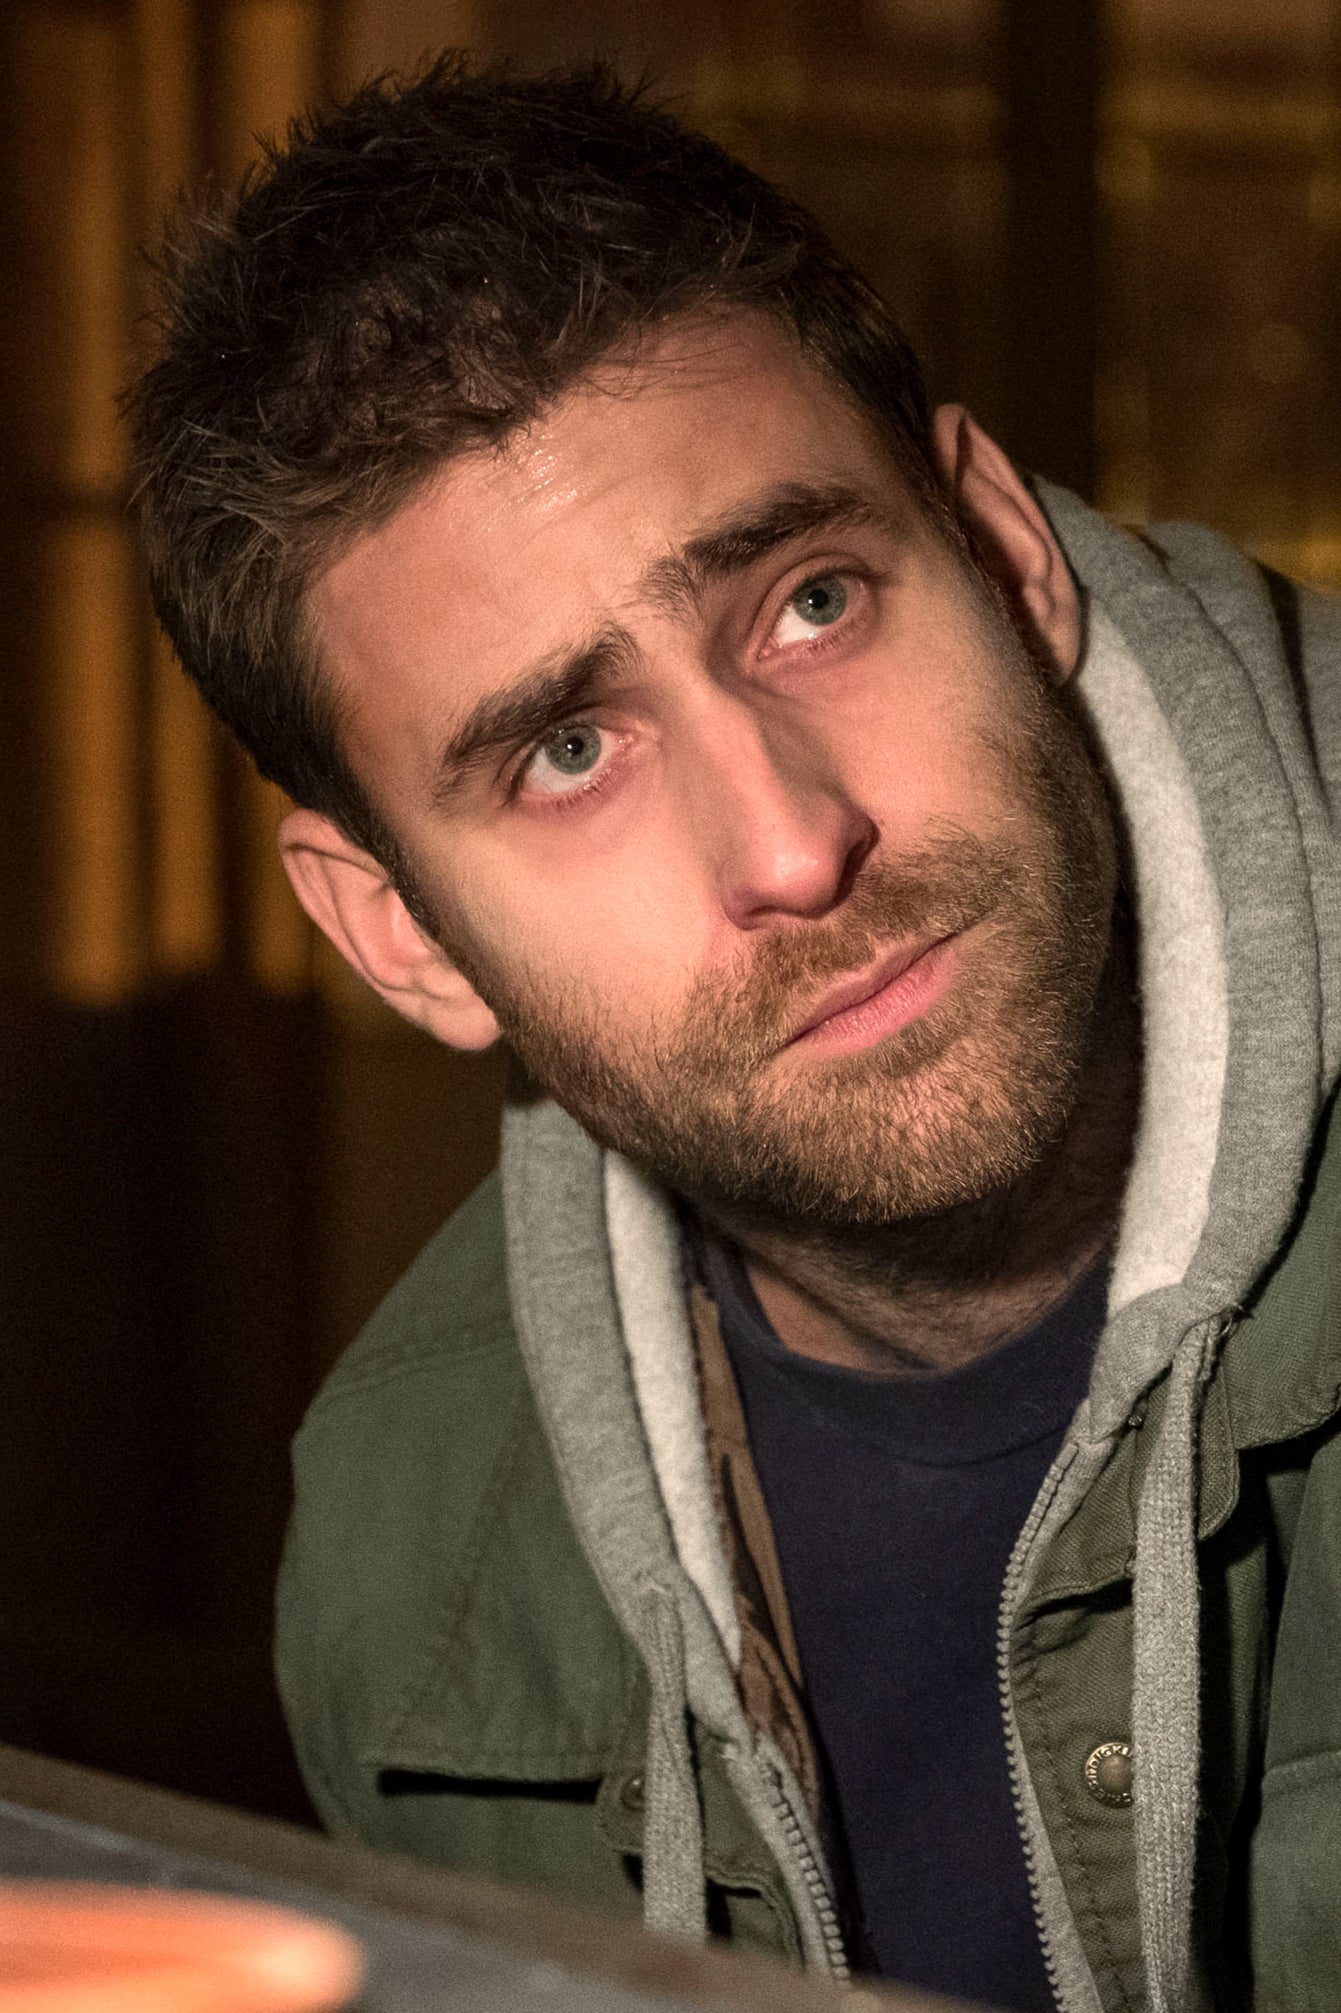 Cathartic: Jackson-Cohen in Netflix’s ‘The Haunting of Hill House’